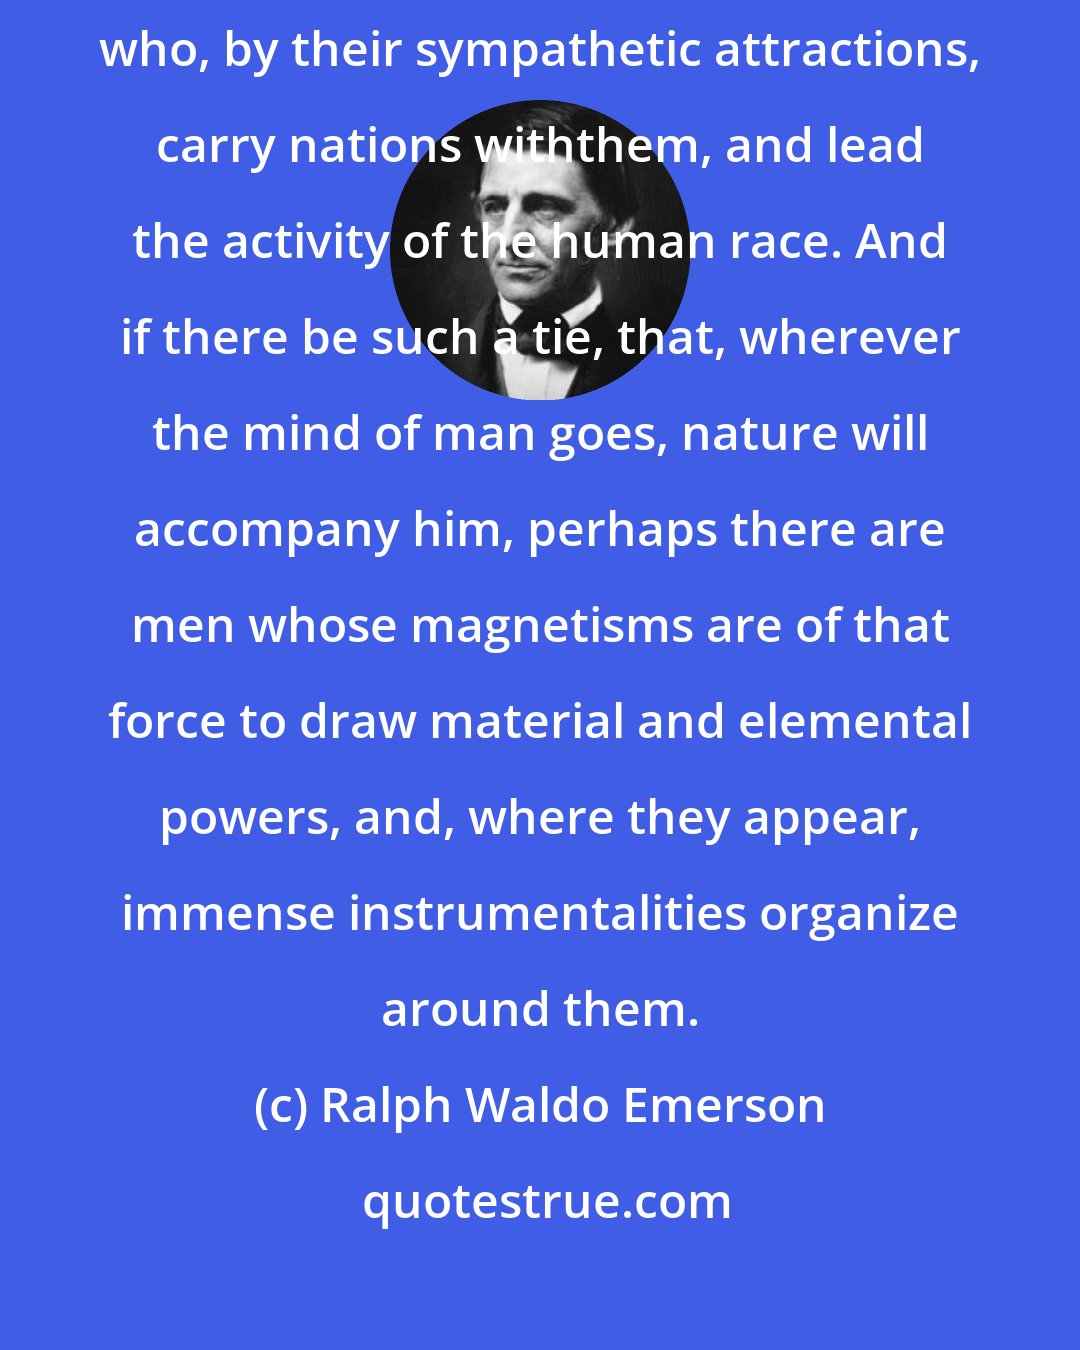 Ralph Waldo Emerson: Who shall set a limit to the influence of a human being? There are men, who, by their sympathetic attractions, carry nations withthem, and lead the activity of the human race. And if there be such a tie, that, wherever the mind of man goes, nature will accompany him, perhaps there are men whose magnetisms are of that force to draw material and elemental powers, and, where they appear, immense instrumentalities organize around them.